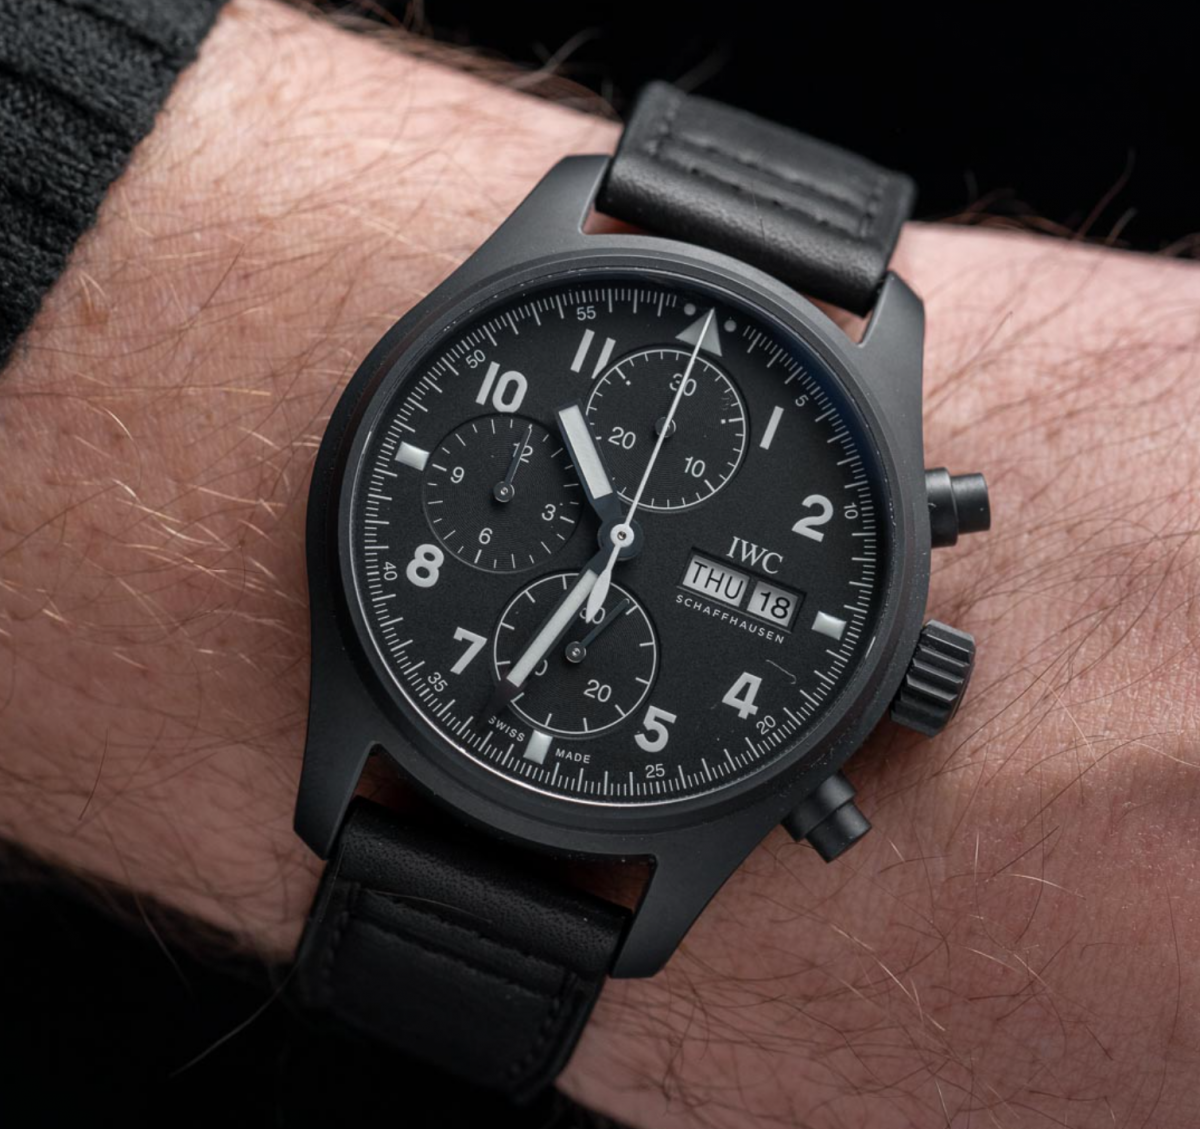 Best Quality UK Replica IWC Watches Of 2021 — Pilot’s Watch Chronograph Edition “Tribute to 3705”